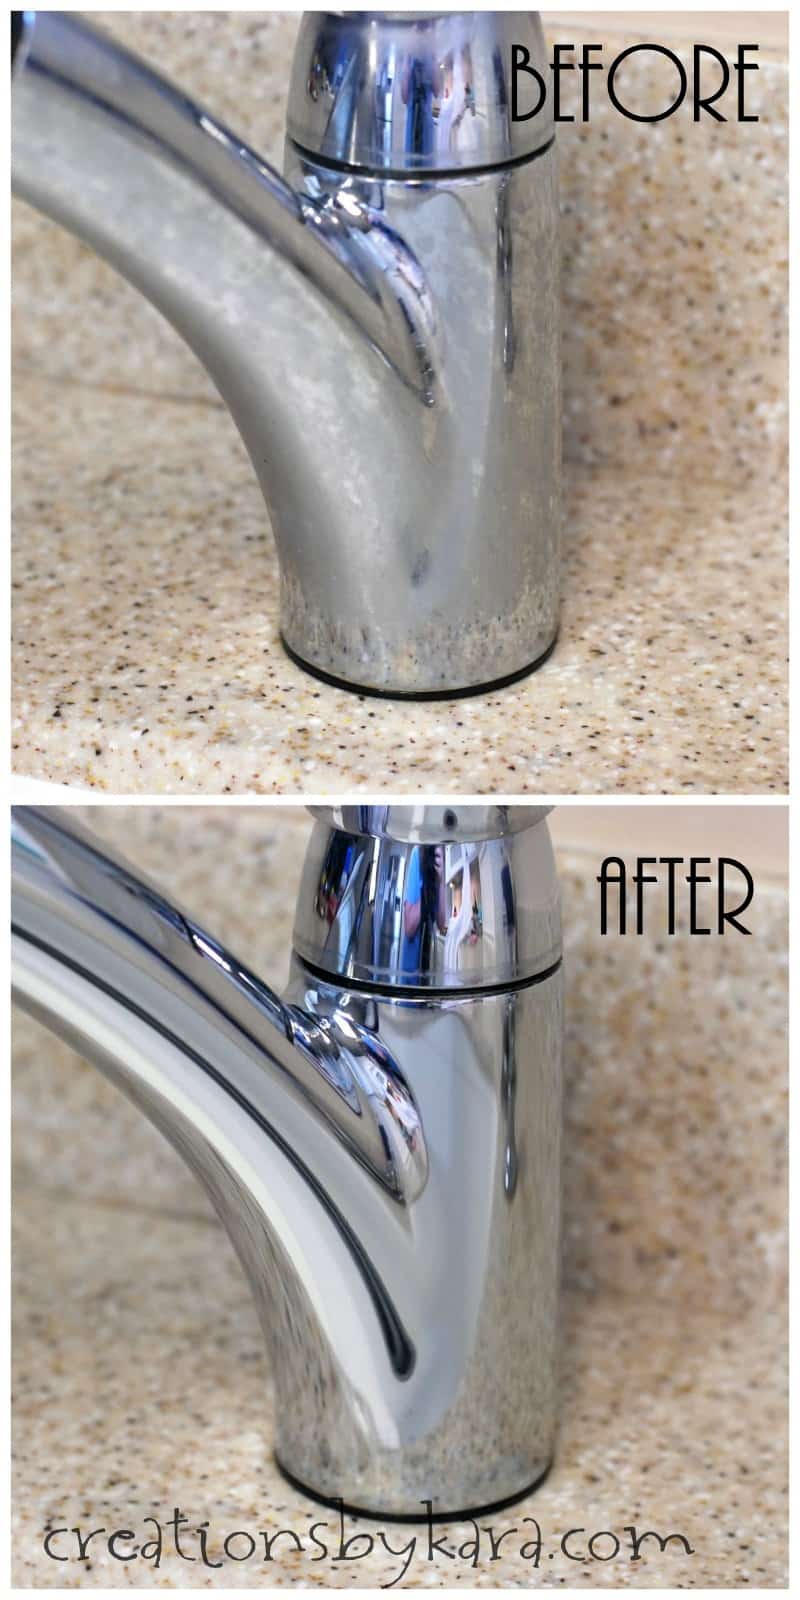 How to Clean Stainless Steel Faucet?